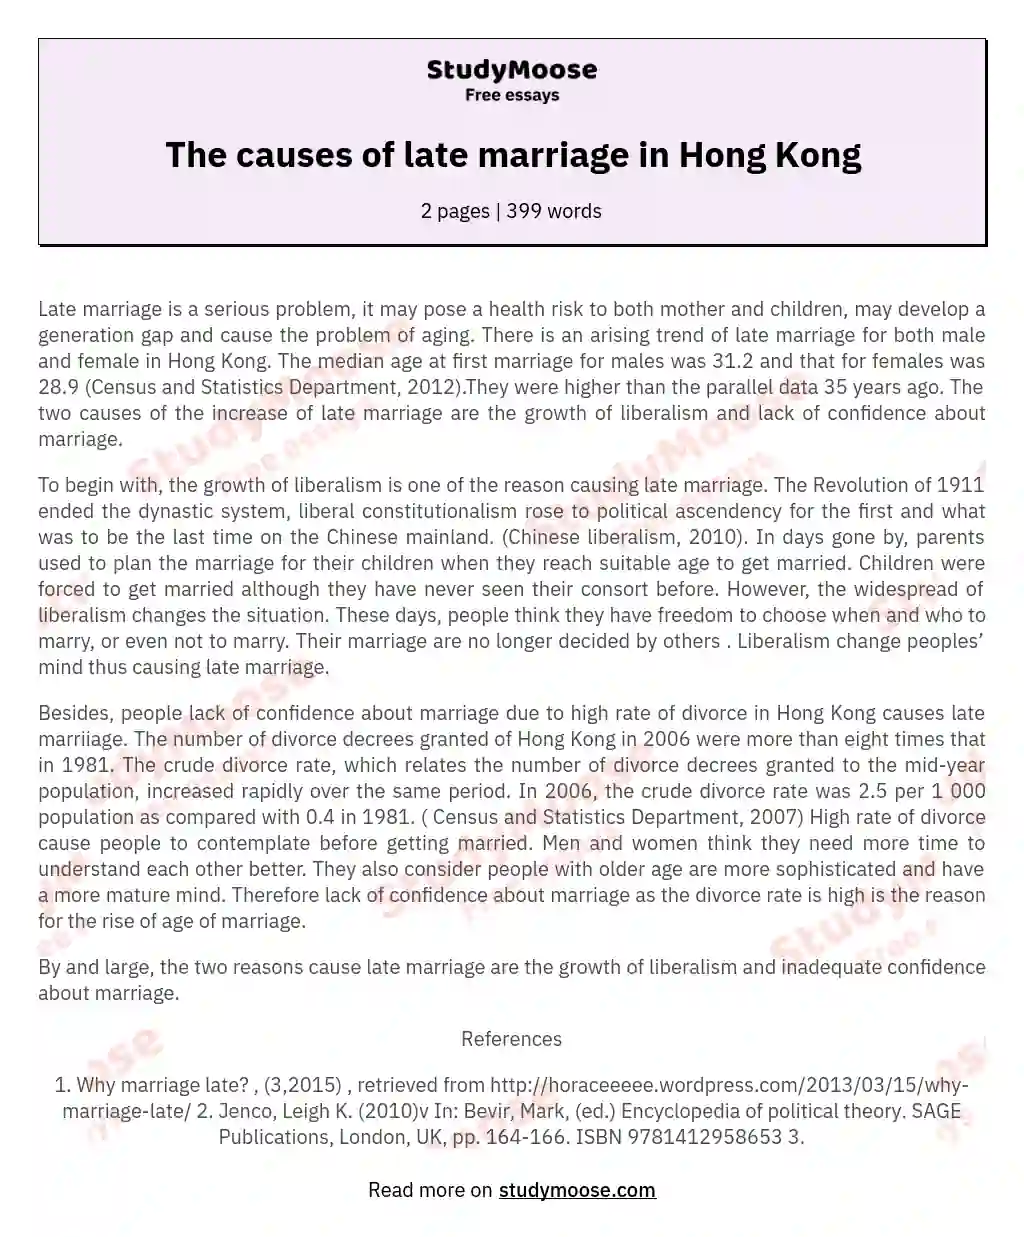 The causes of late marriage in Hong Kong essay